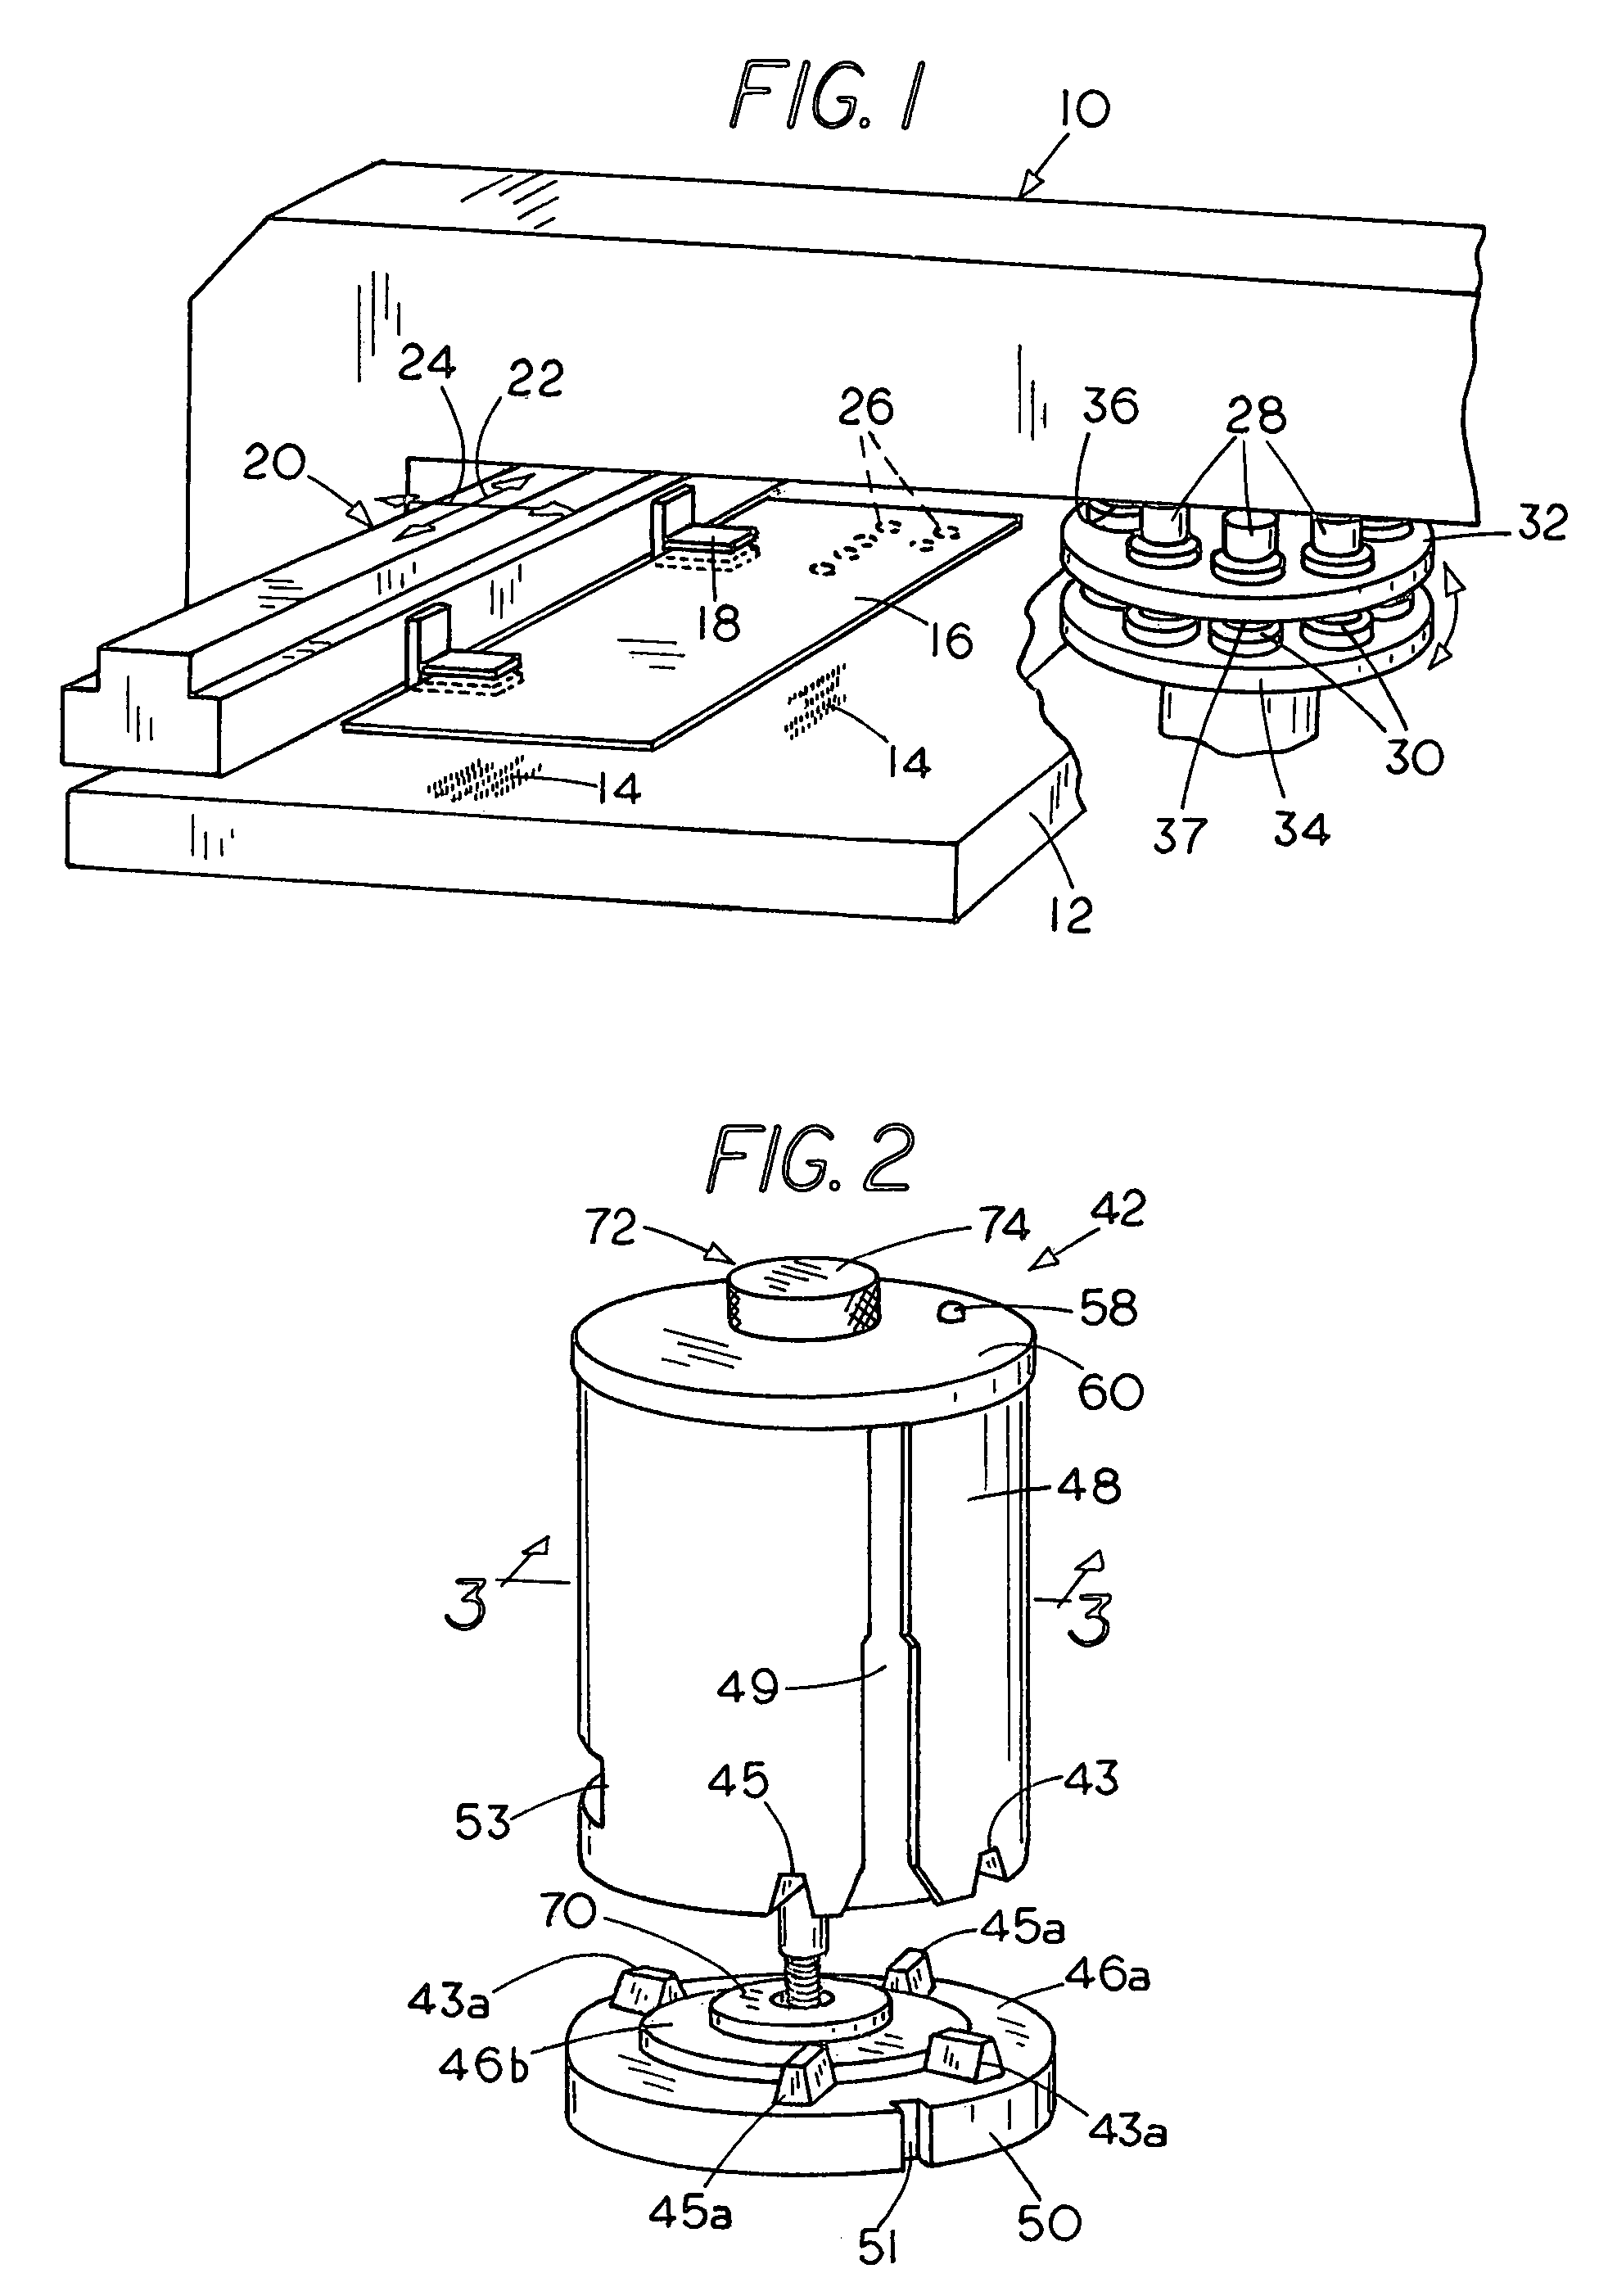 Punch press alignment instrument